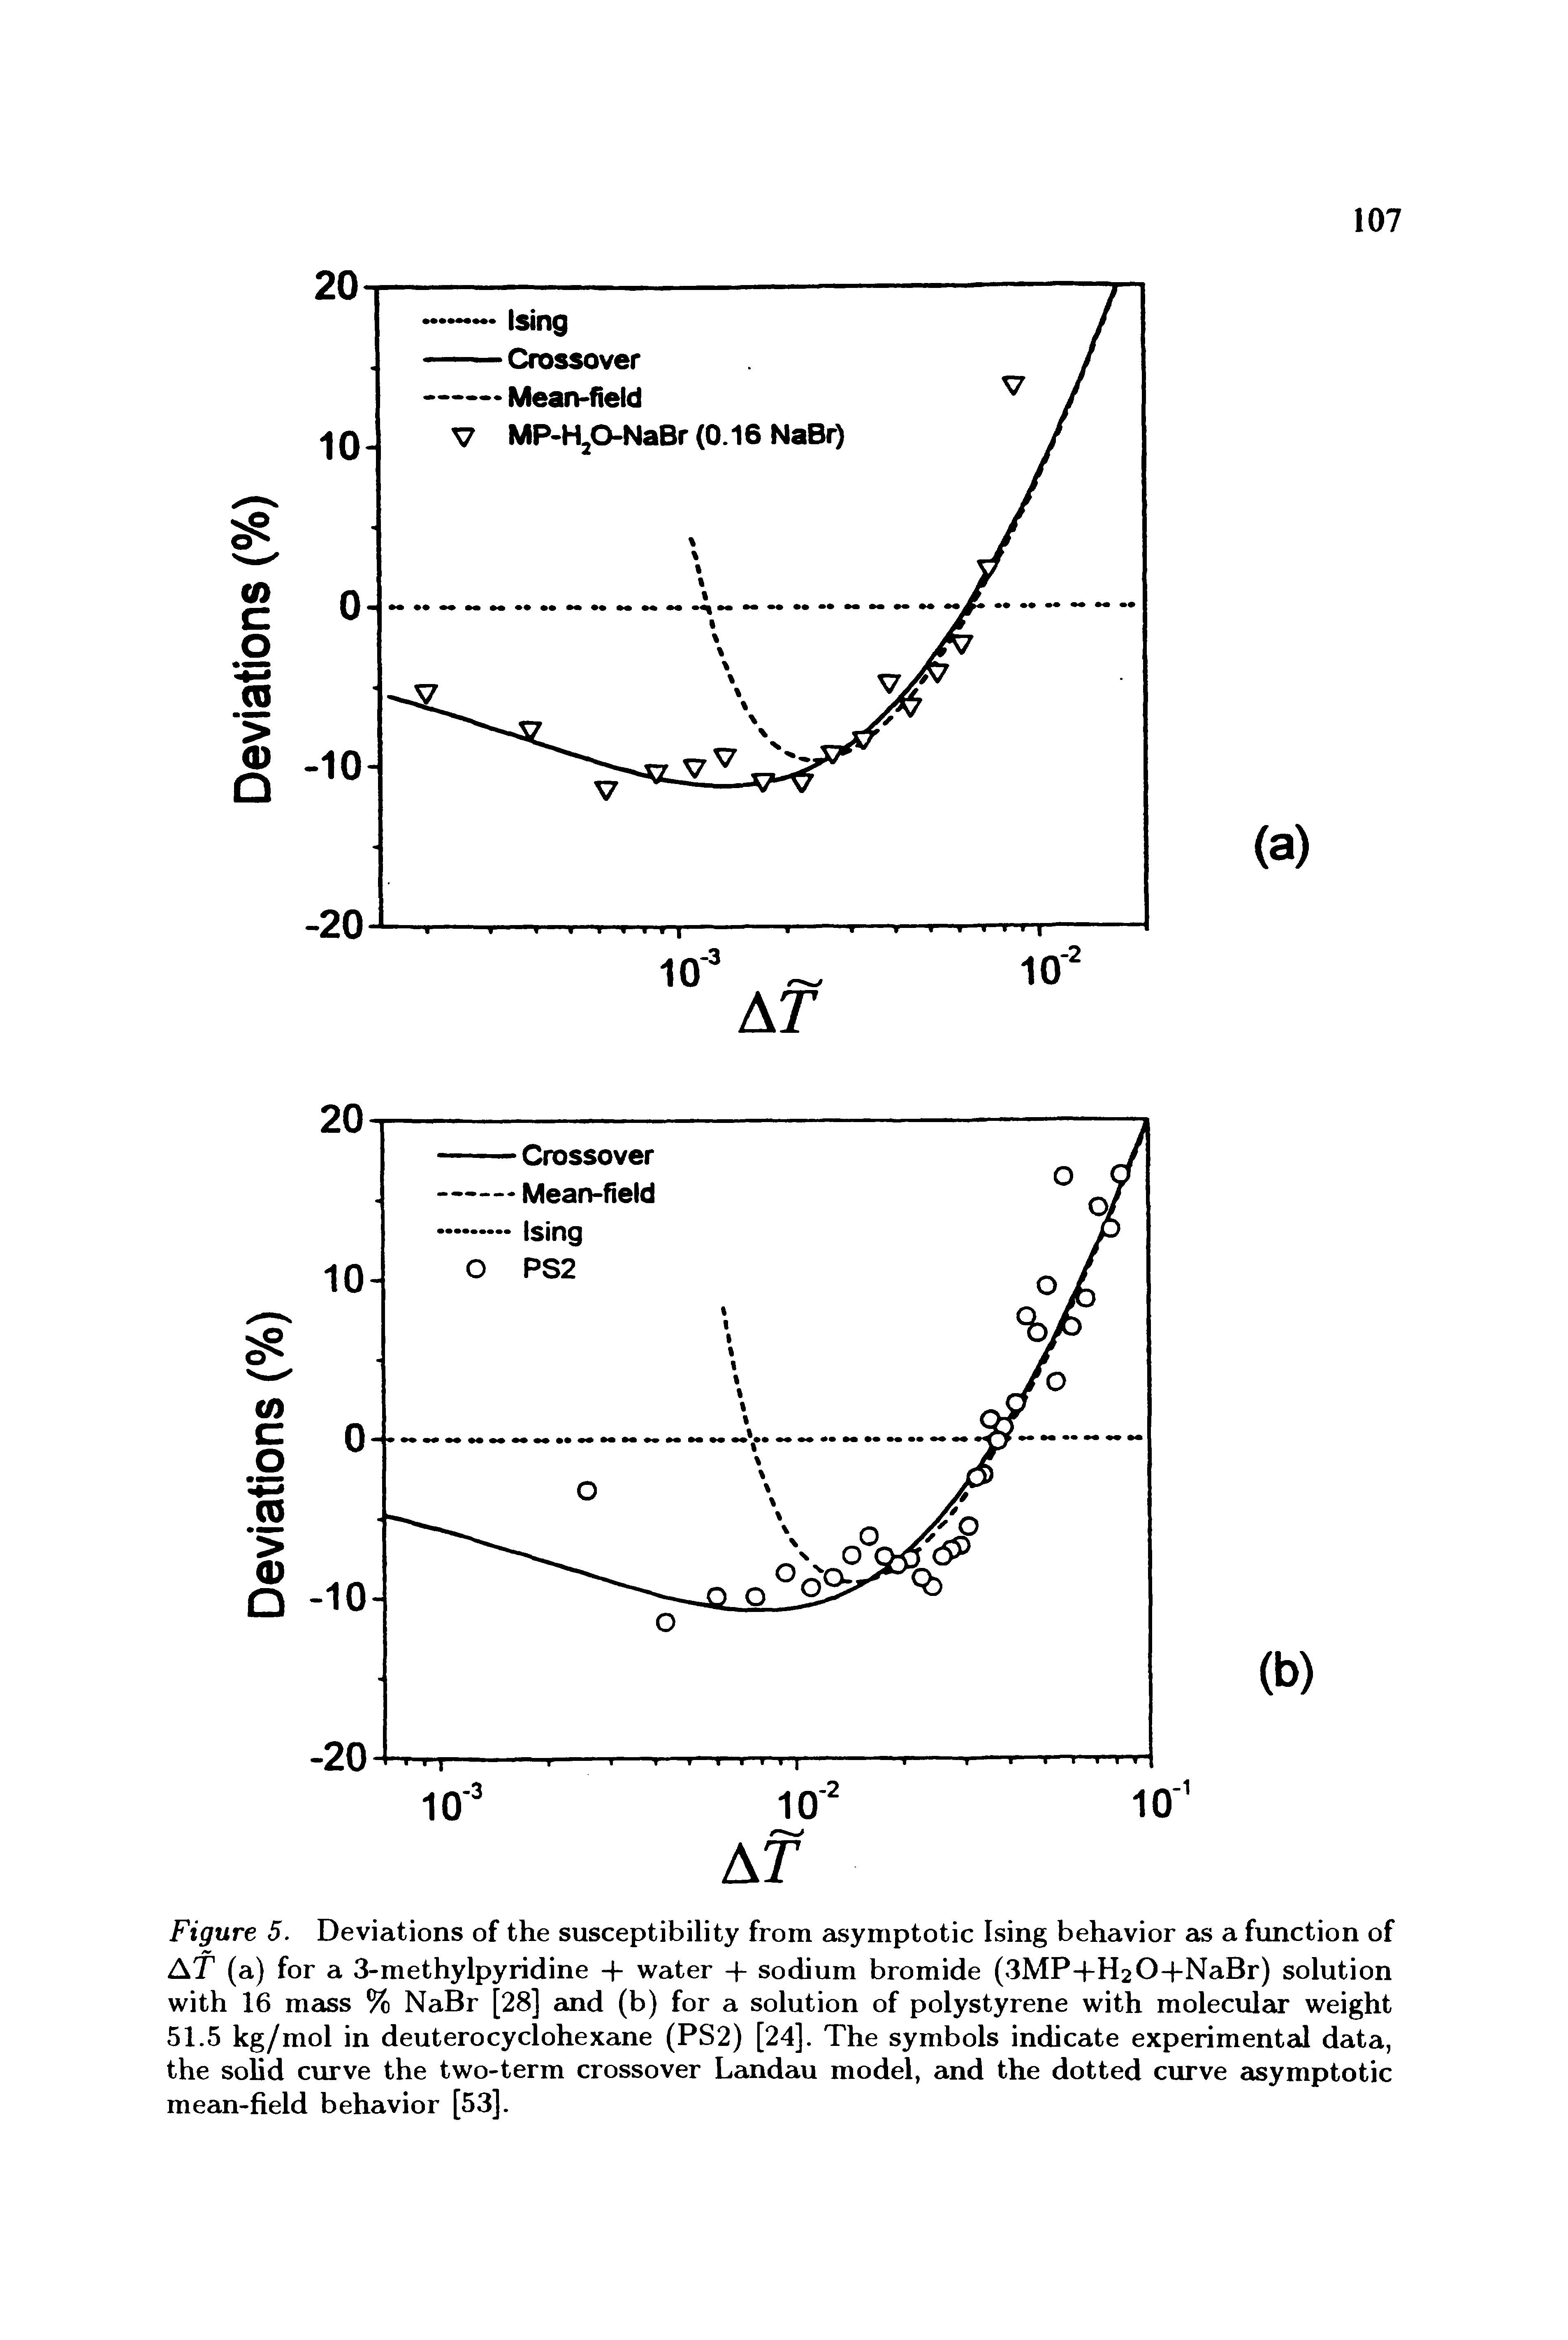 Figure 5. Deviations of the susceptibility from asymptotic Ising behavior eis a function of AT (a) for a 3-methylpyridine -f water -f sodium bromide (3MP-fH2 0- -NaBr) solution with 16 meiss % NaBr [28] cind (b) for a solution of polystyrene with moleculcir weight 51.5 kg/mol in deuterocyclohexane (PS2) [24]. The symbols indicate experimental data, the solid curve the two-term crossover Landau model, and the dotted curve asymptotic mean-field behavior [53].